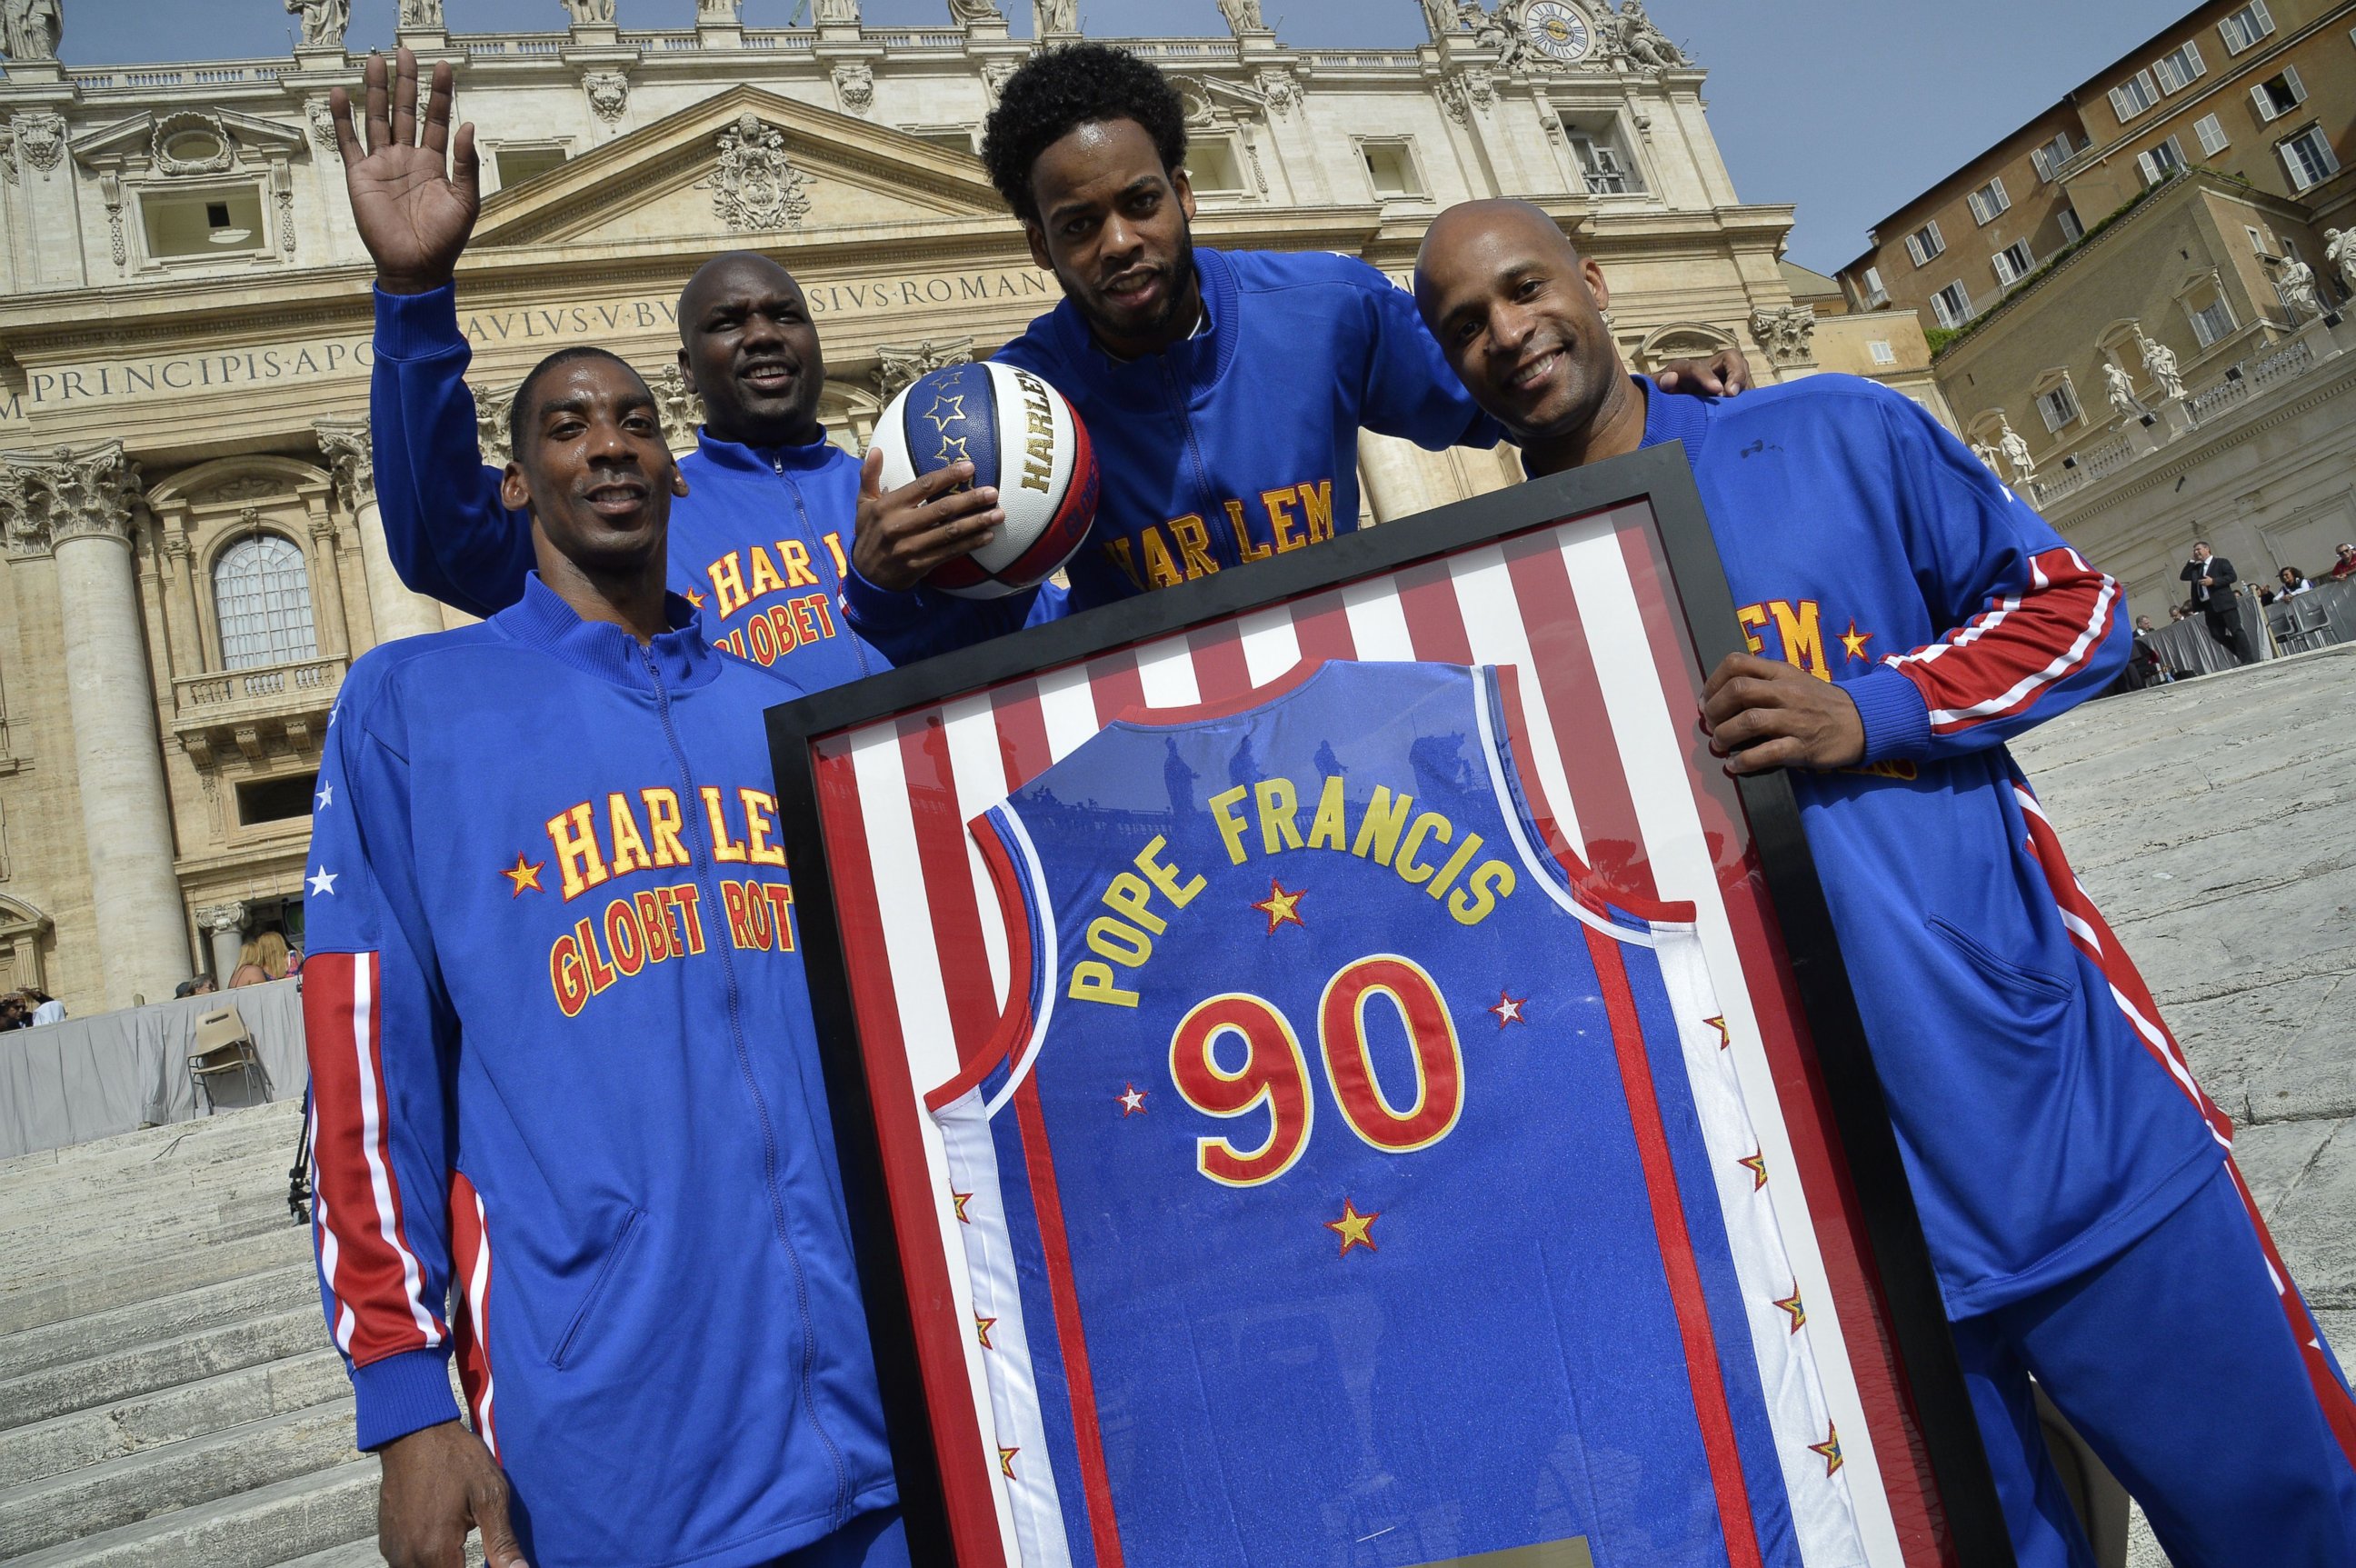 PHOTO: Members of the Harlem Globetrotters basketball team pose before the arrival of Pope Francis for his weekly general audience at St Peter's square, May 6, 2015, at the Vatican.